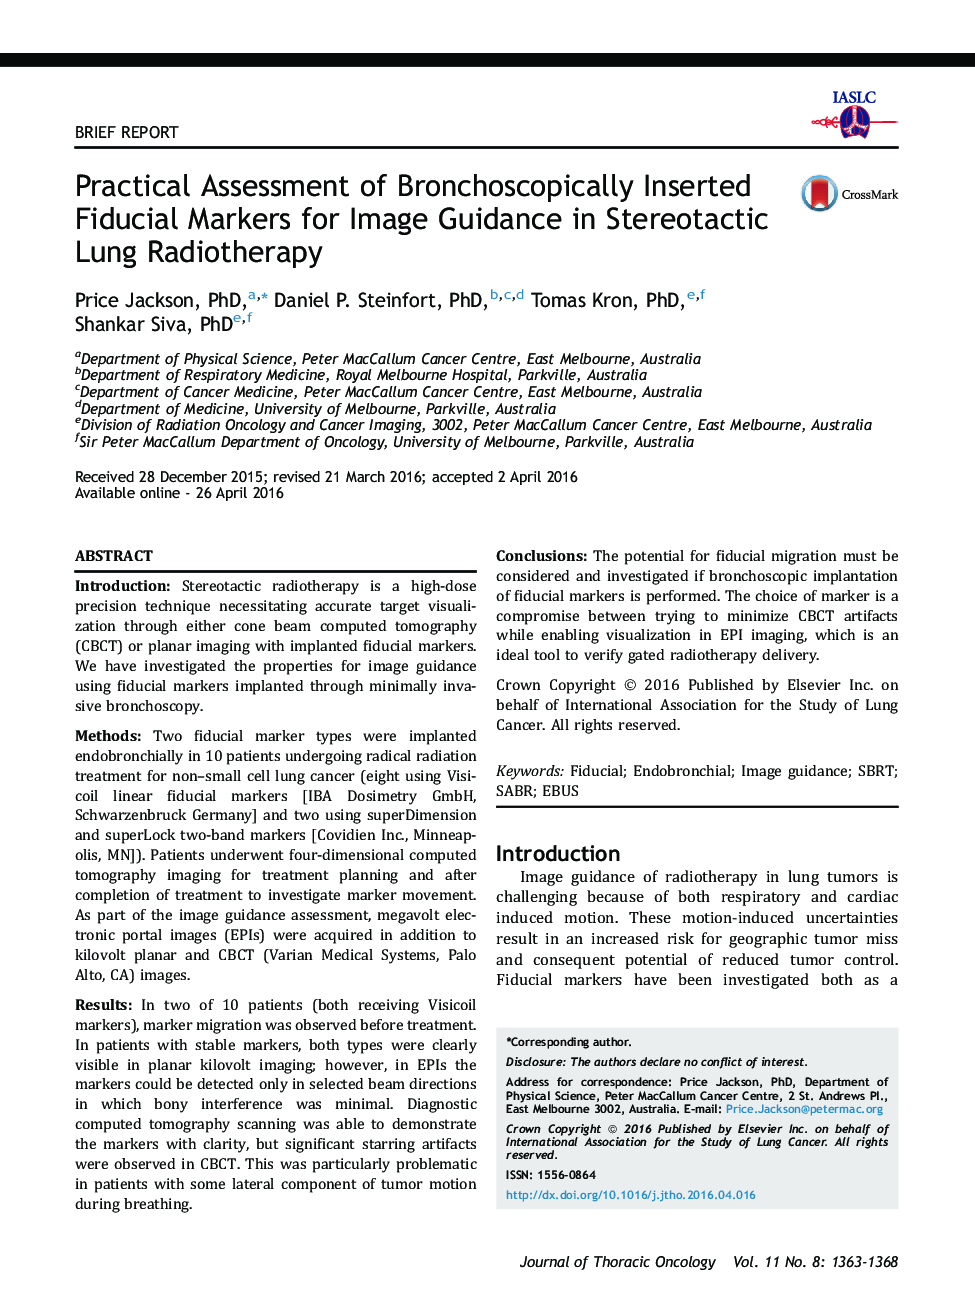 Practical Assessment of Bronchoscopically Inserted Fiducial Markers for Image Guidance in Stereotactic Lung Radiotherapy